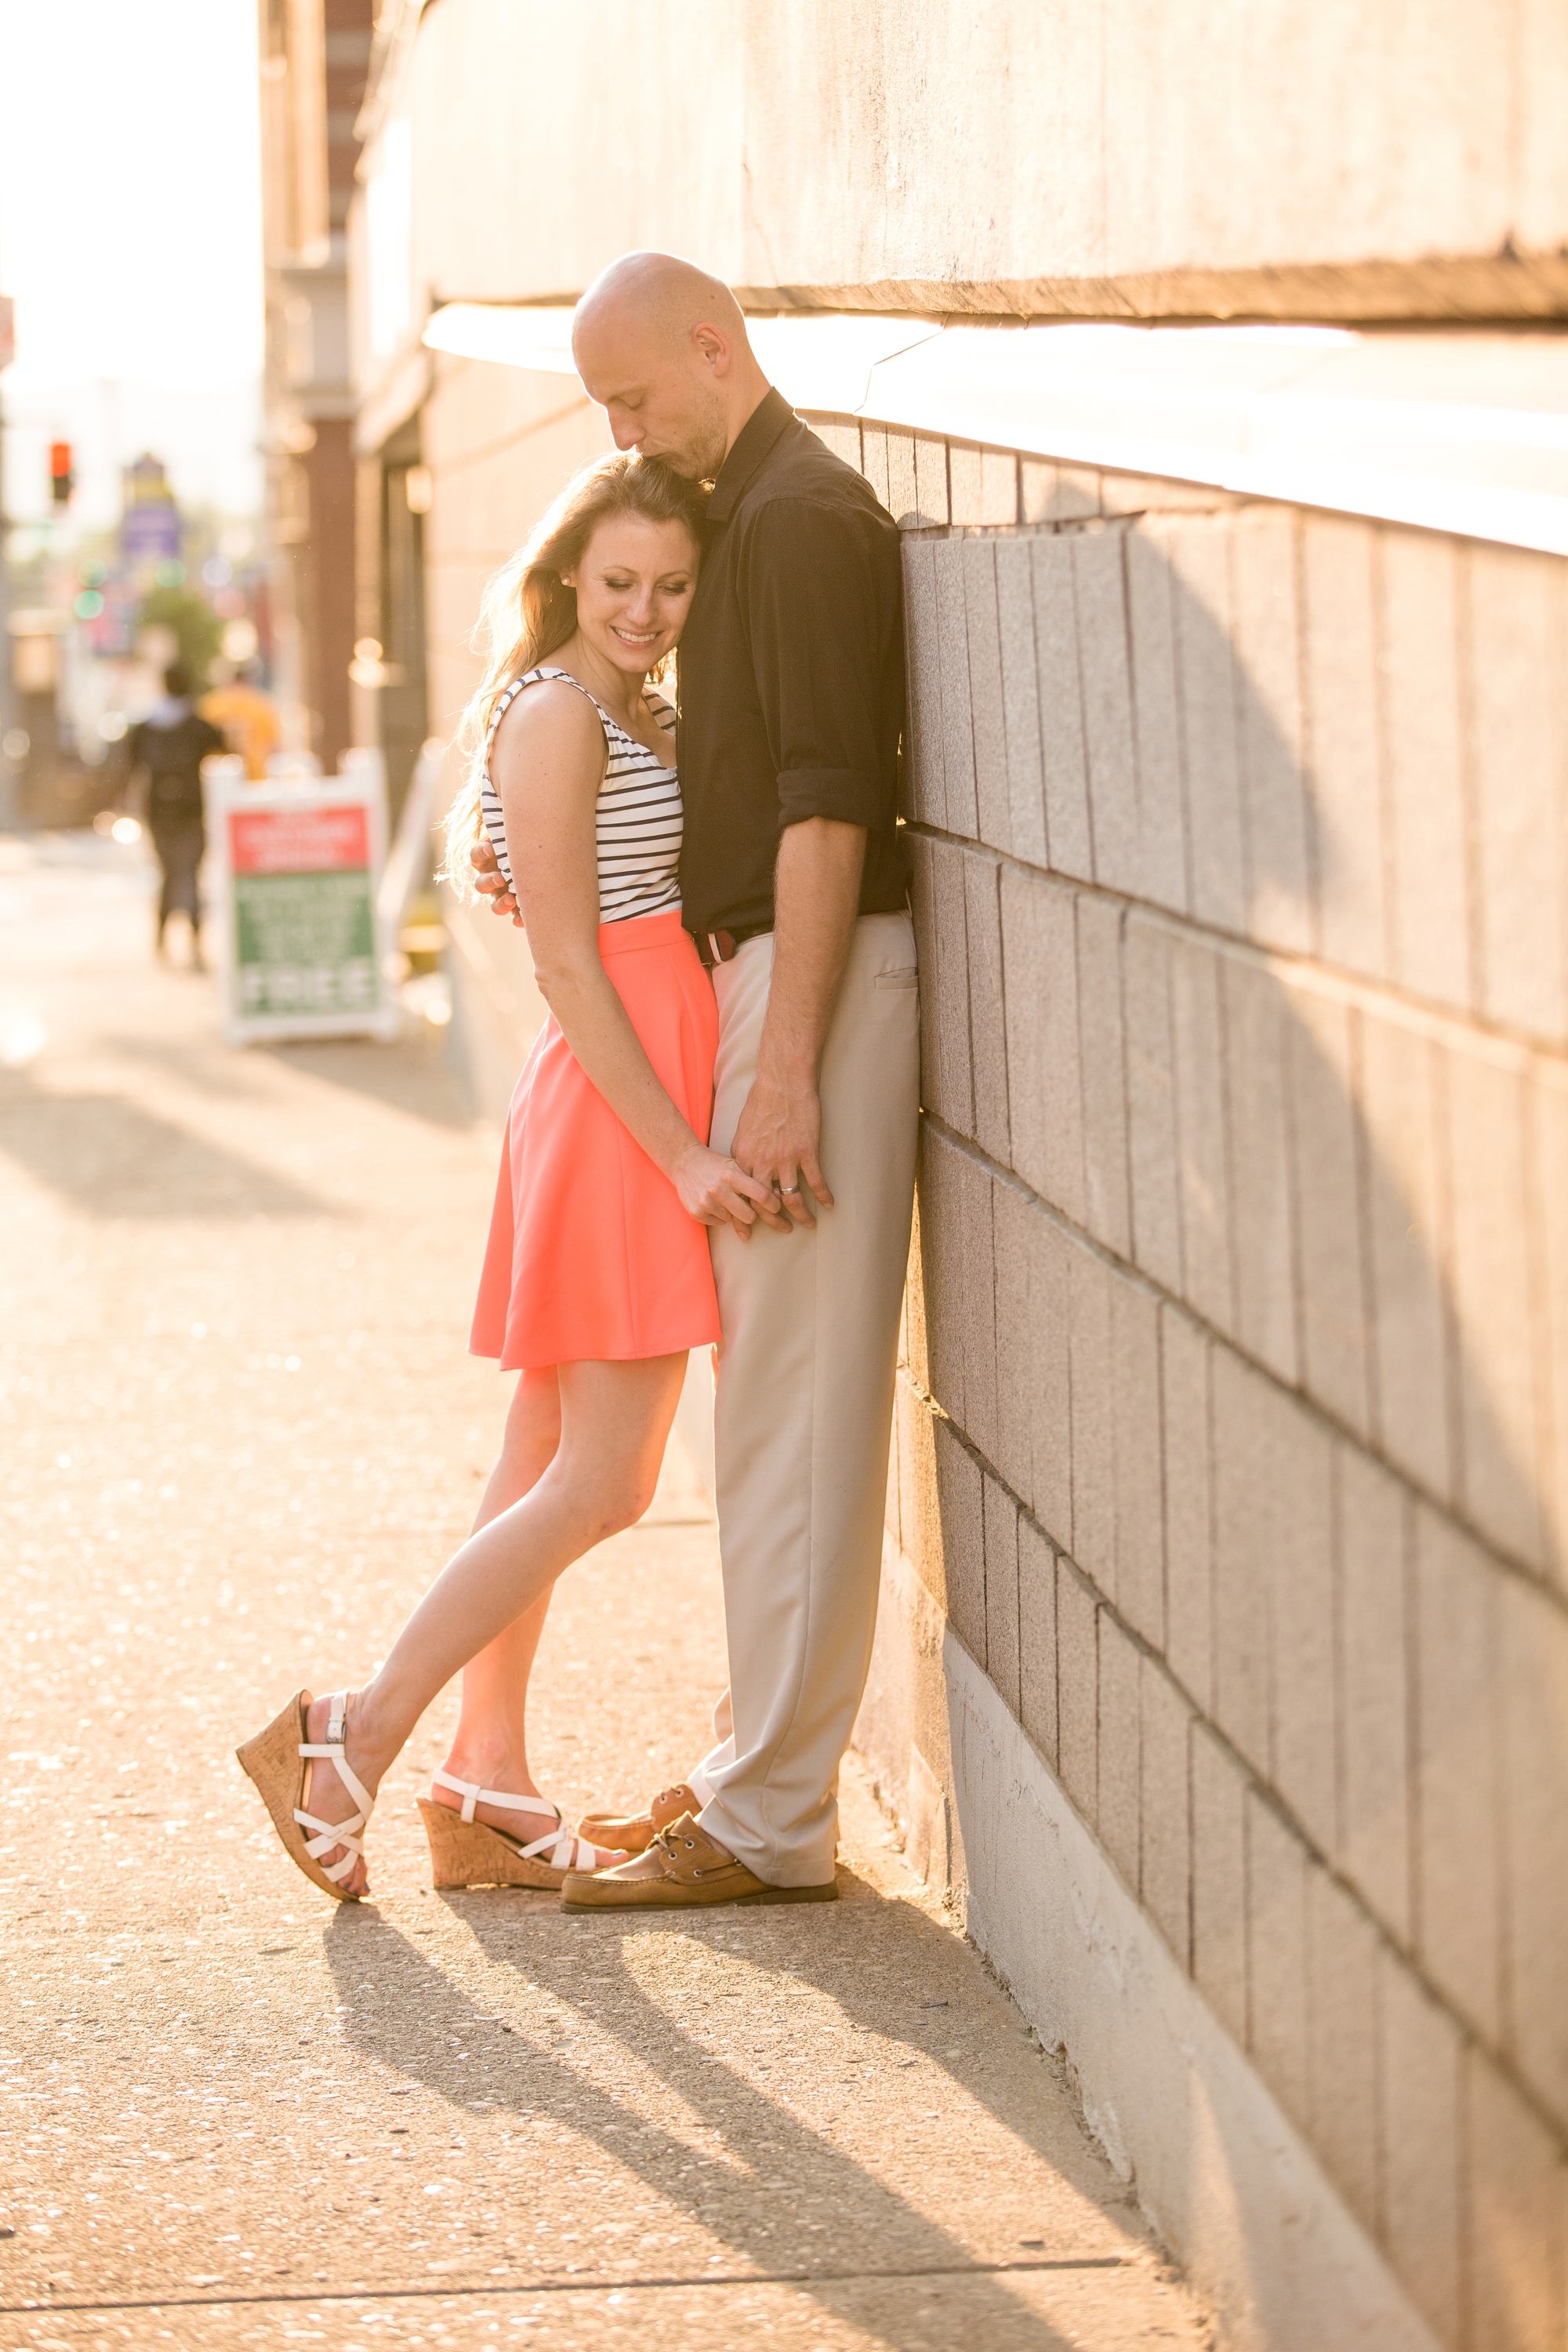 downtown pittsburgh engagement photos, downtown pittsburgh engagement pictures, pittsburgh wedding photographer, downtown pittsburgh wedding photographer